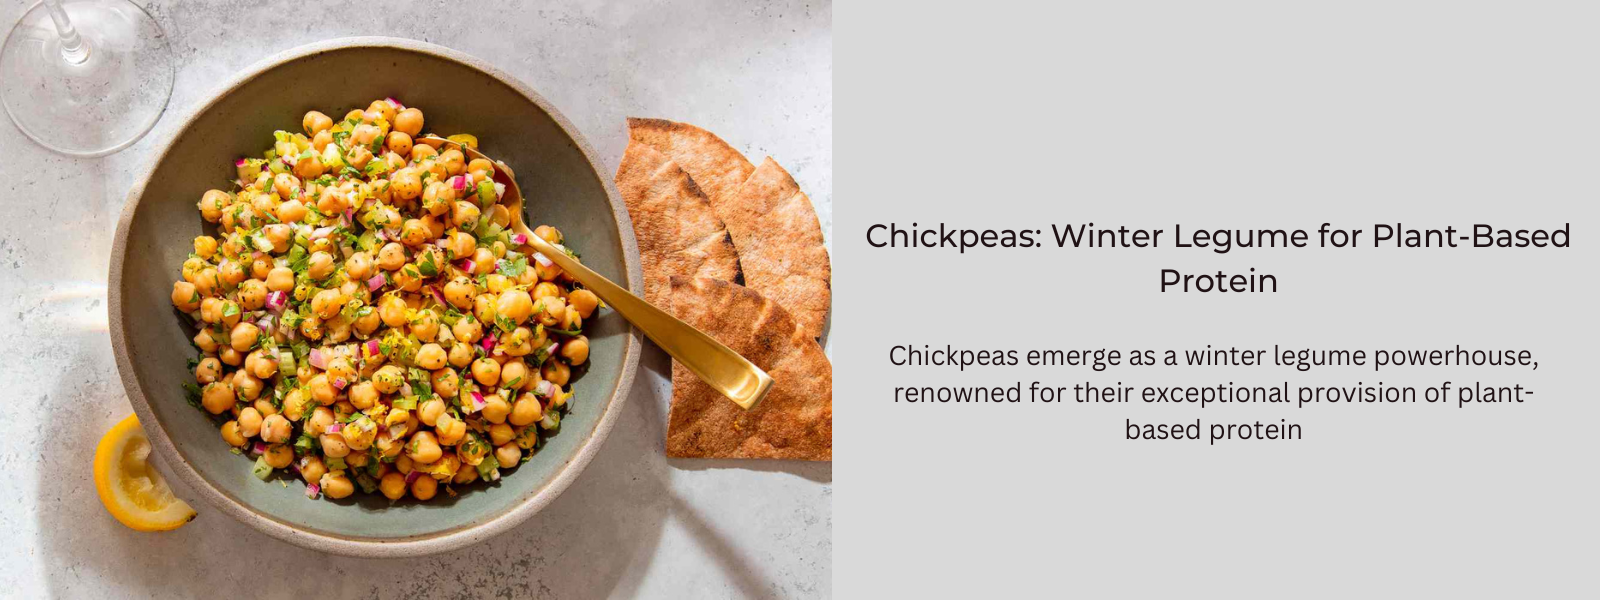 Chickpeas: Winter Legume for Plant-Based Protein